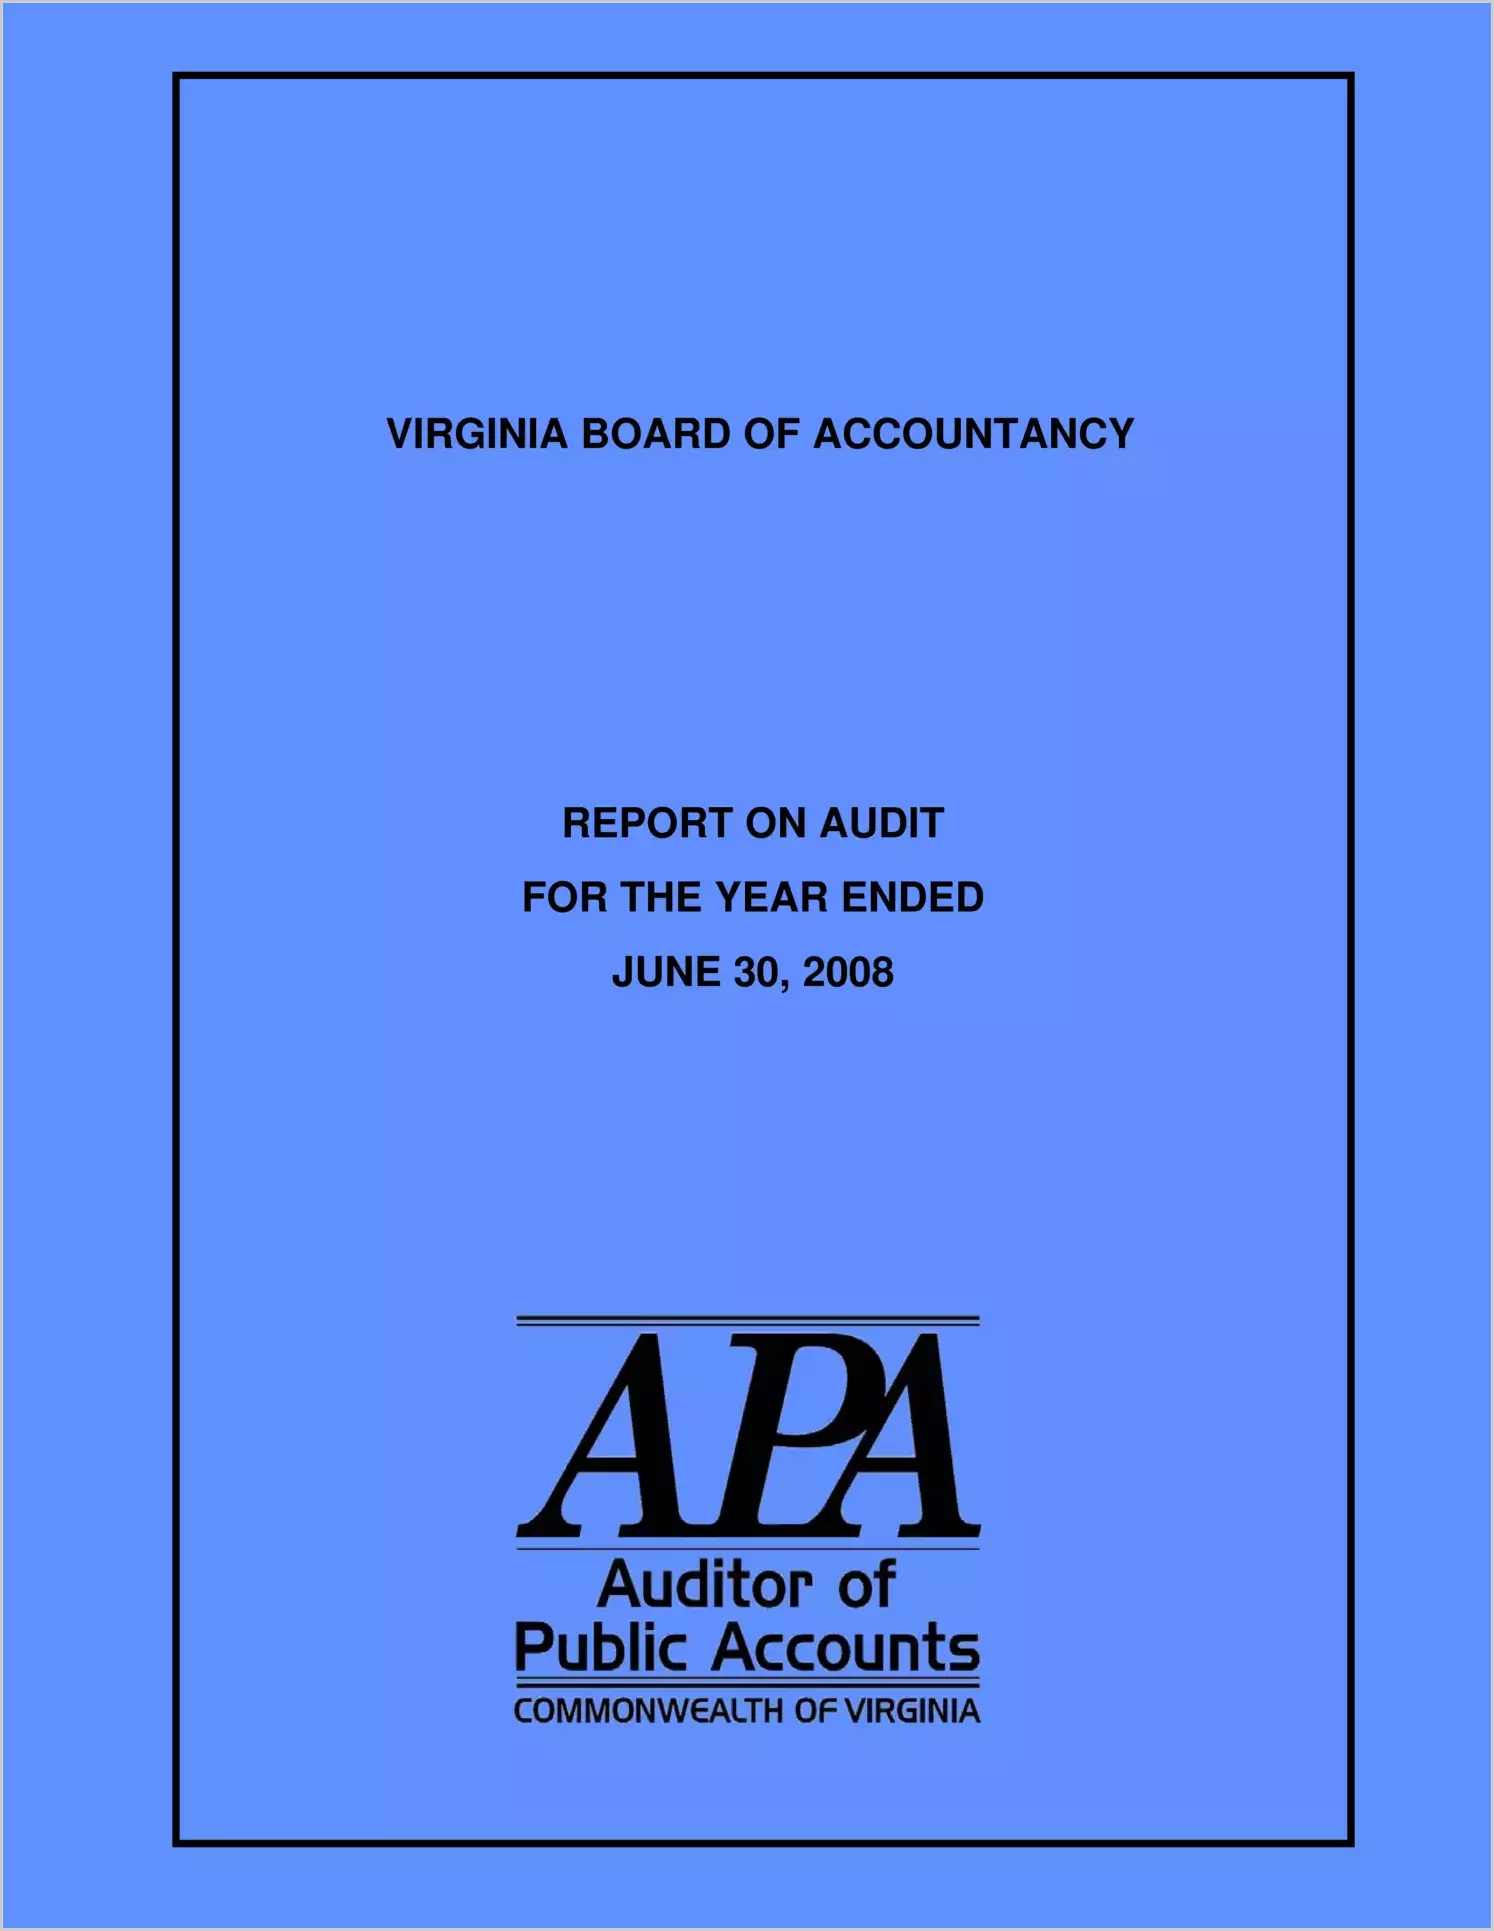 Virginia Board of Accountancy for the year ended June 30, 2008